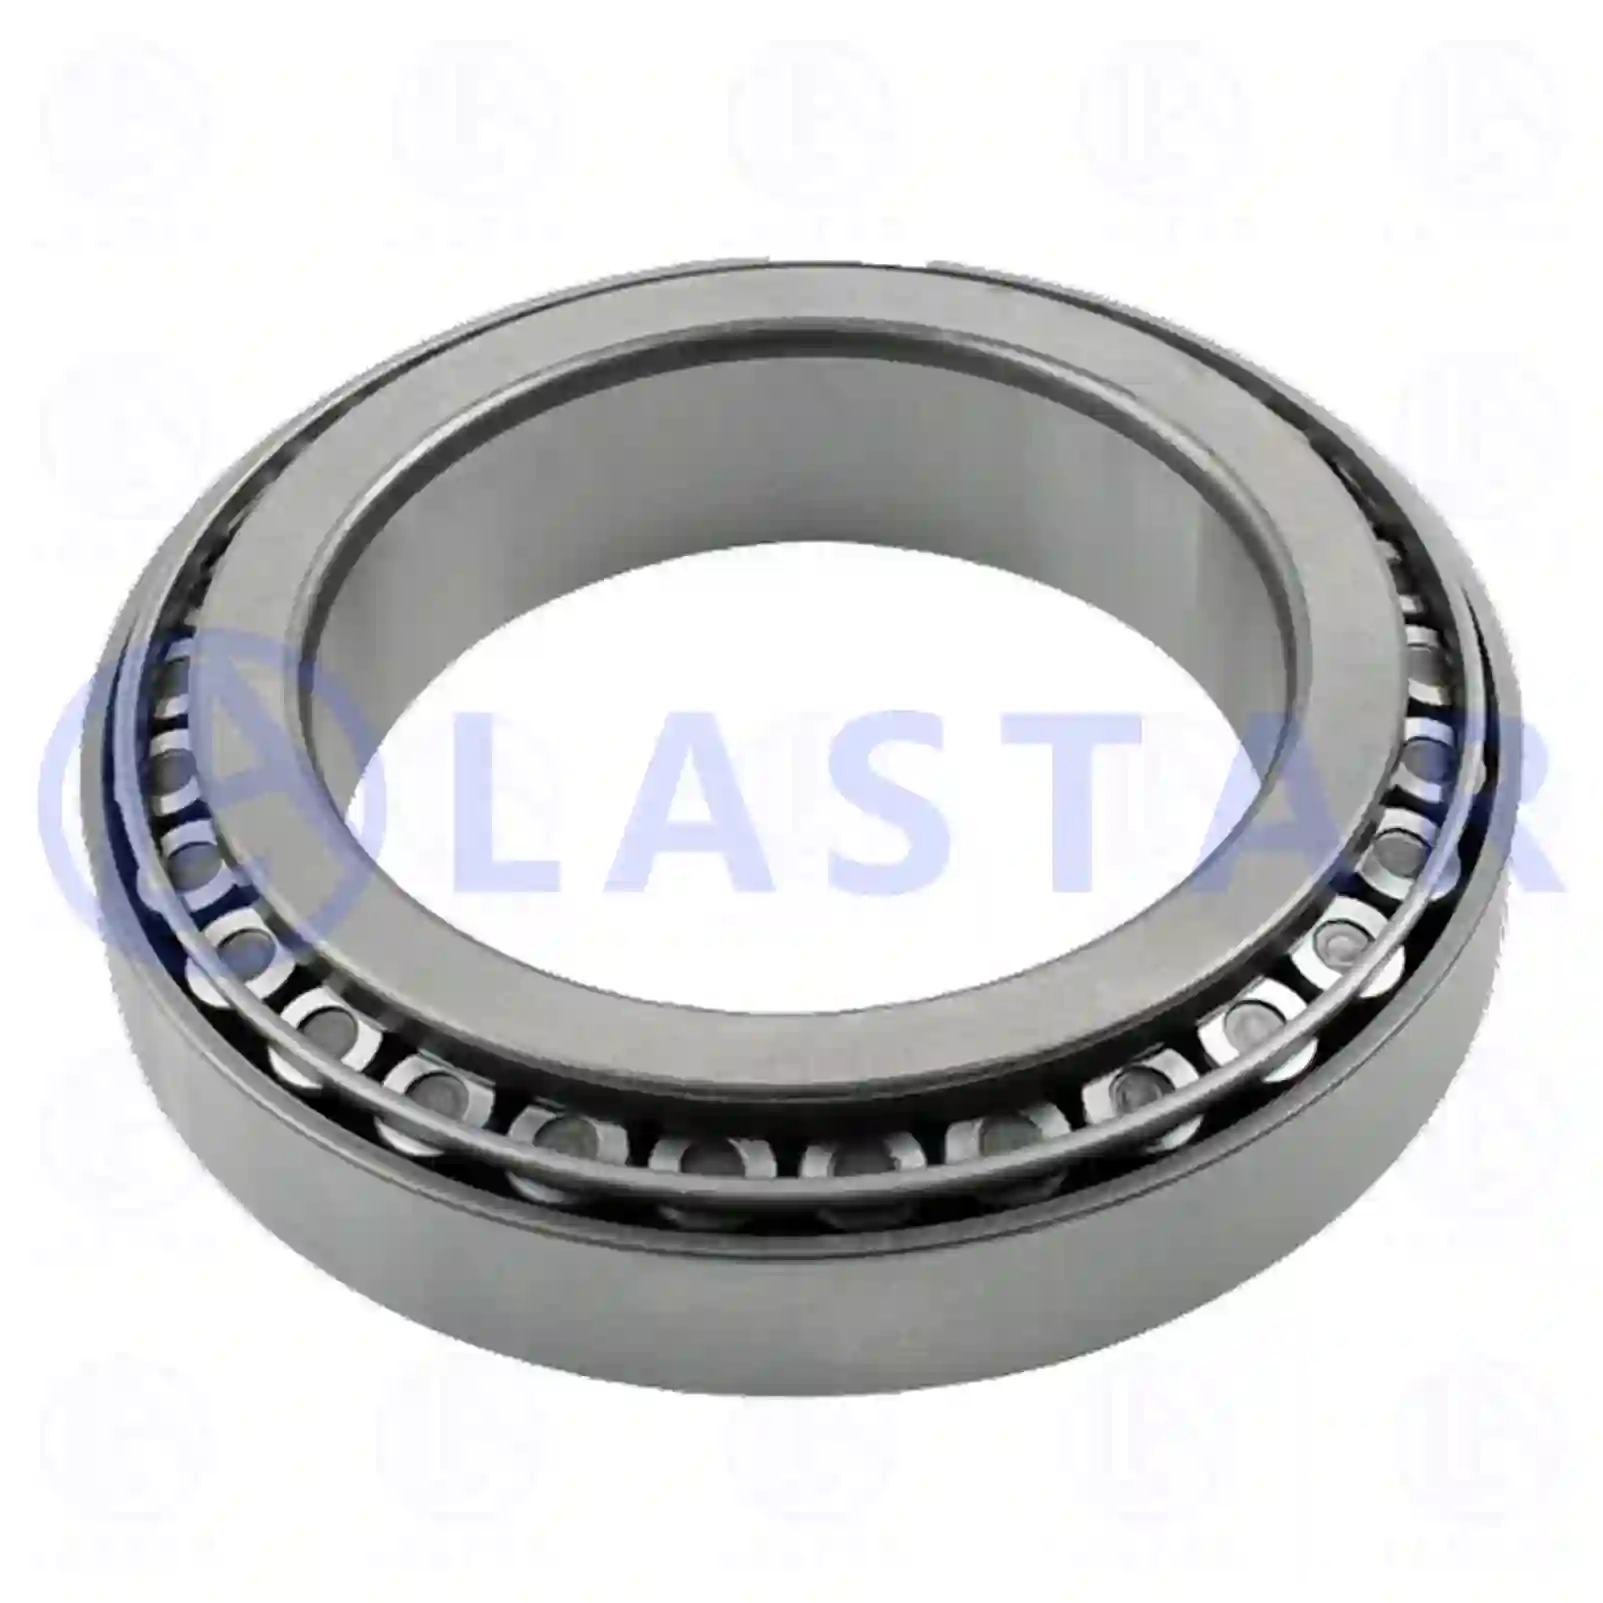 Rear Axle, Complete Tapered roller bearing, la no: 77730720 ,  oem no:0699117, 699117, 005103771, 01905027, 07984896, 93161536, 06324801500, 06324890119, 06324890121, 06324890122, 0019816405, 0019817205, 0049817405, 0069810405, 0069815505, 0179817905, 1364630, 164042, 274114, 334123, 184625, 2V5501283A Lastar Spare Part | Truck Spare Parts, Auotomotive Spare Parts